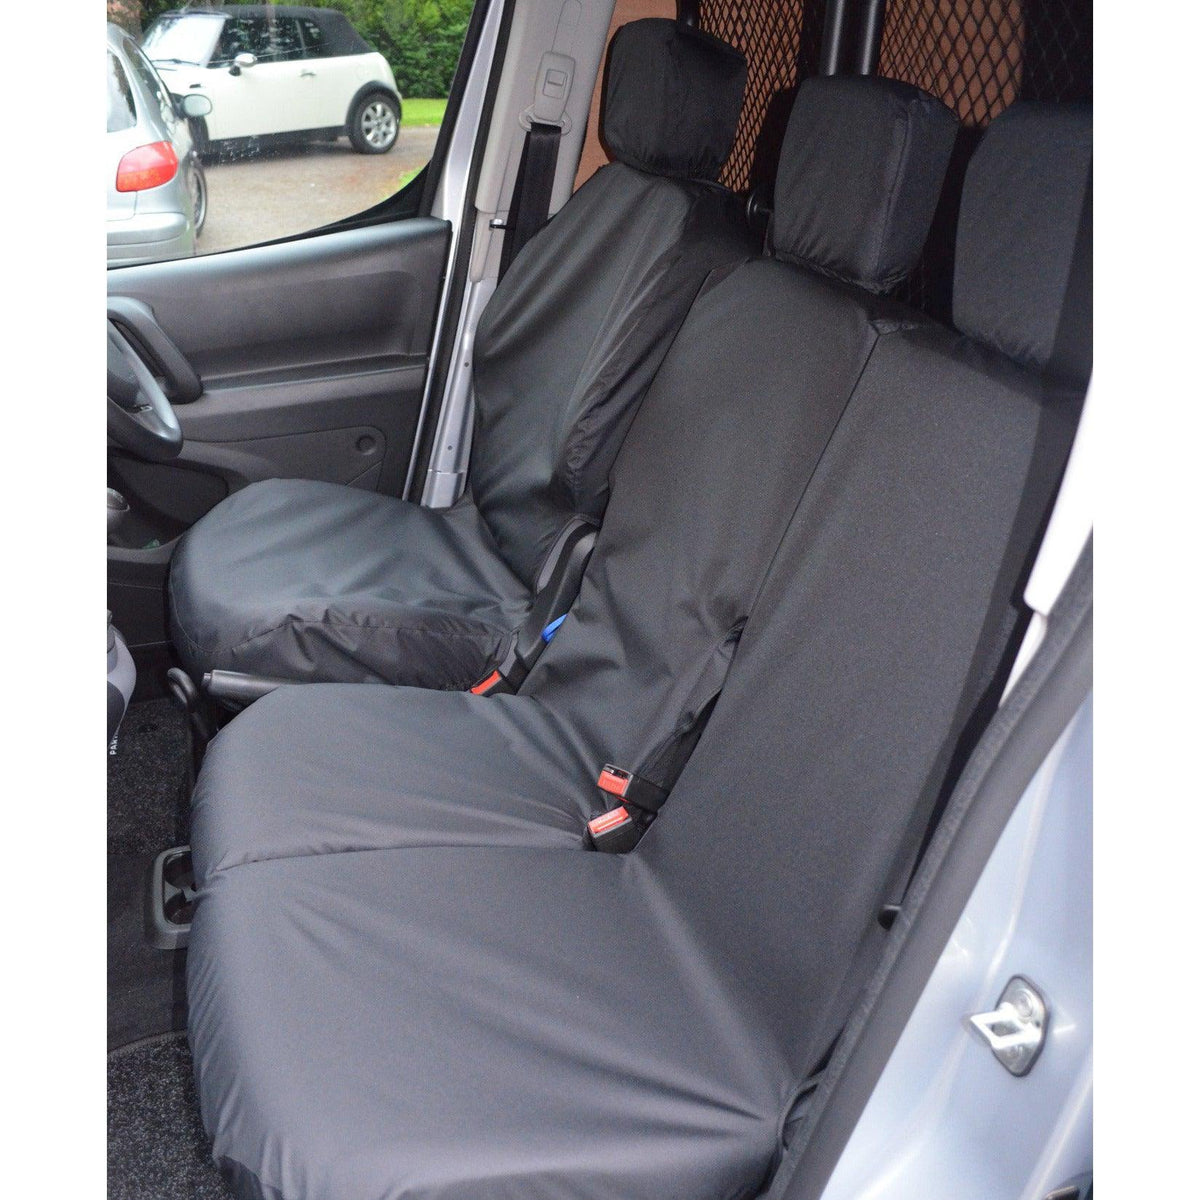 CITROEN BERLINGO 2018 ON - TOYOTA PROACE CITY 2020 ON DRIVER AND DOUBLE PASSENGER FRONT SEAT COVERS – BLACK - Storm Xccessories2